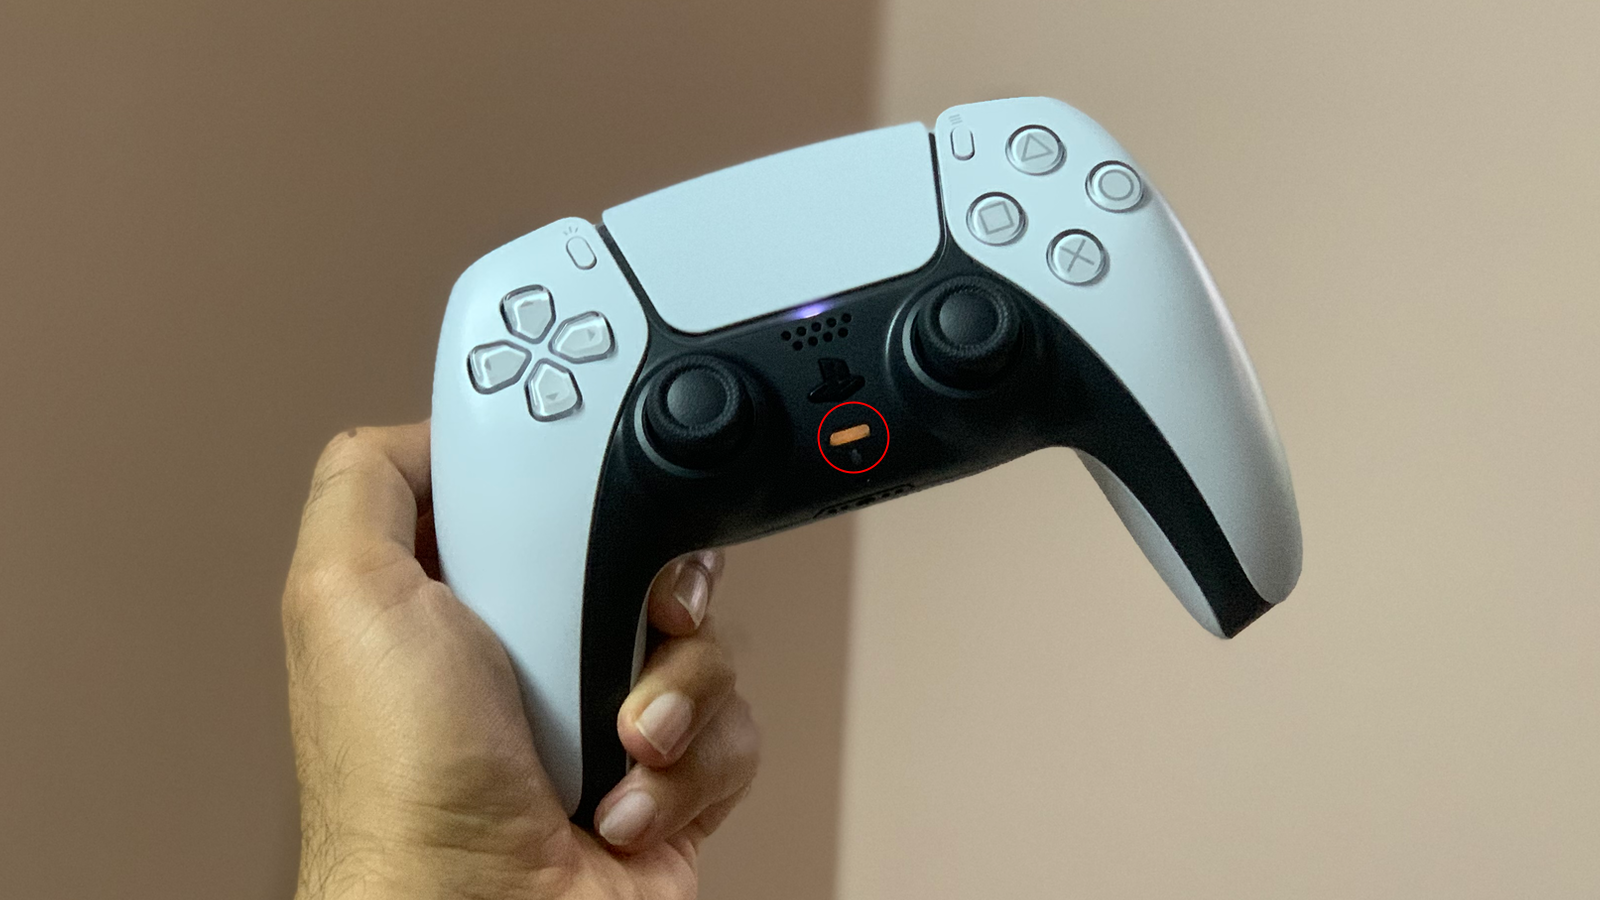 The microphone mute button on PS5's DualSense controller. (Photo: Pranay Parab)